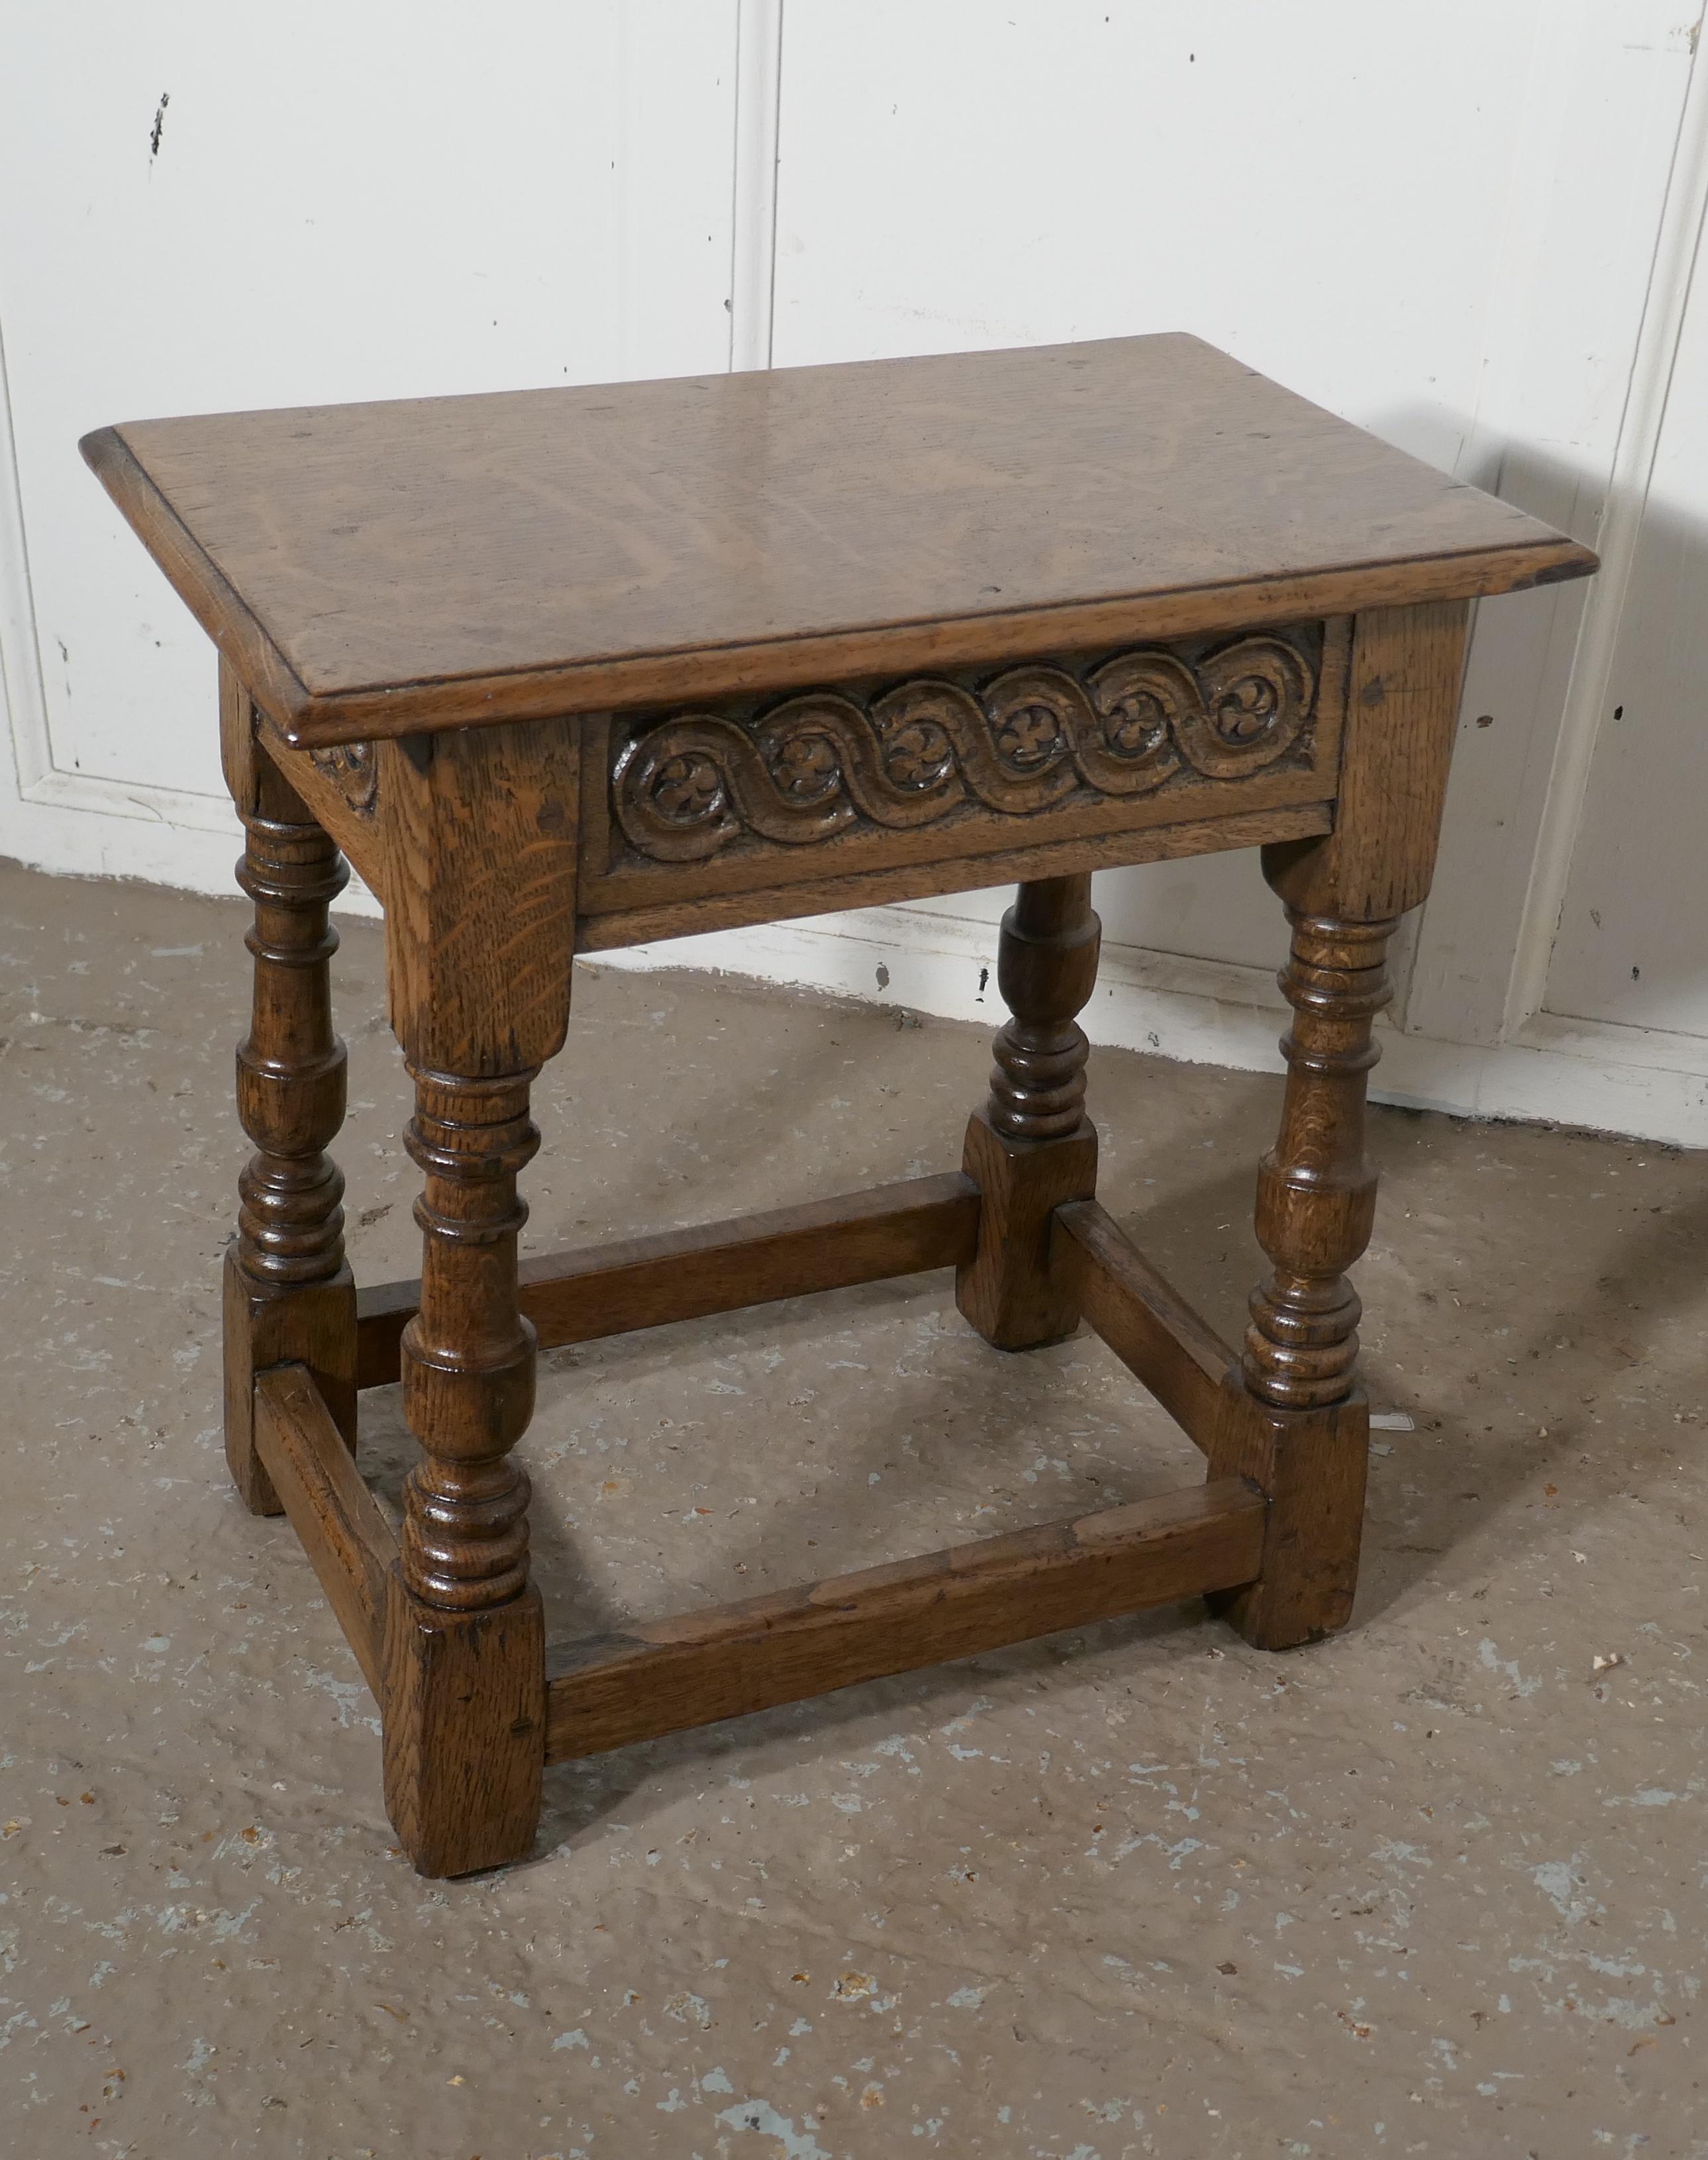 17th century style Ipswich oak joint or coffin stool

This is a superb quality piece it is an early 20th century by the Ipswich makers, a copy of the period version, it has been hand made in the traditional way, with all the character of an older